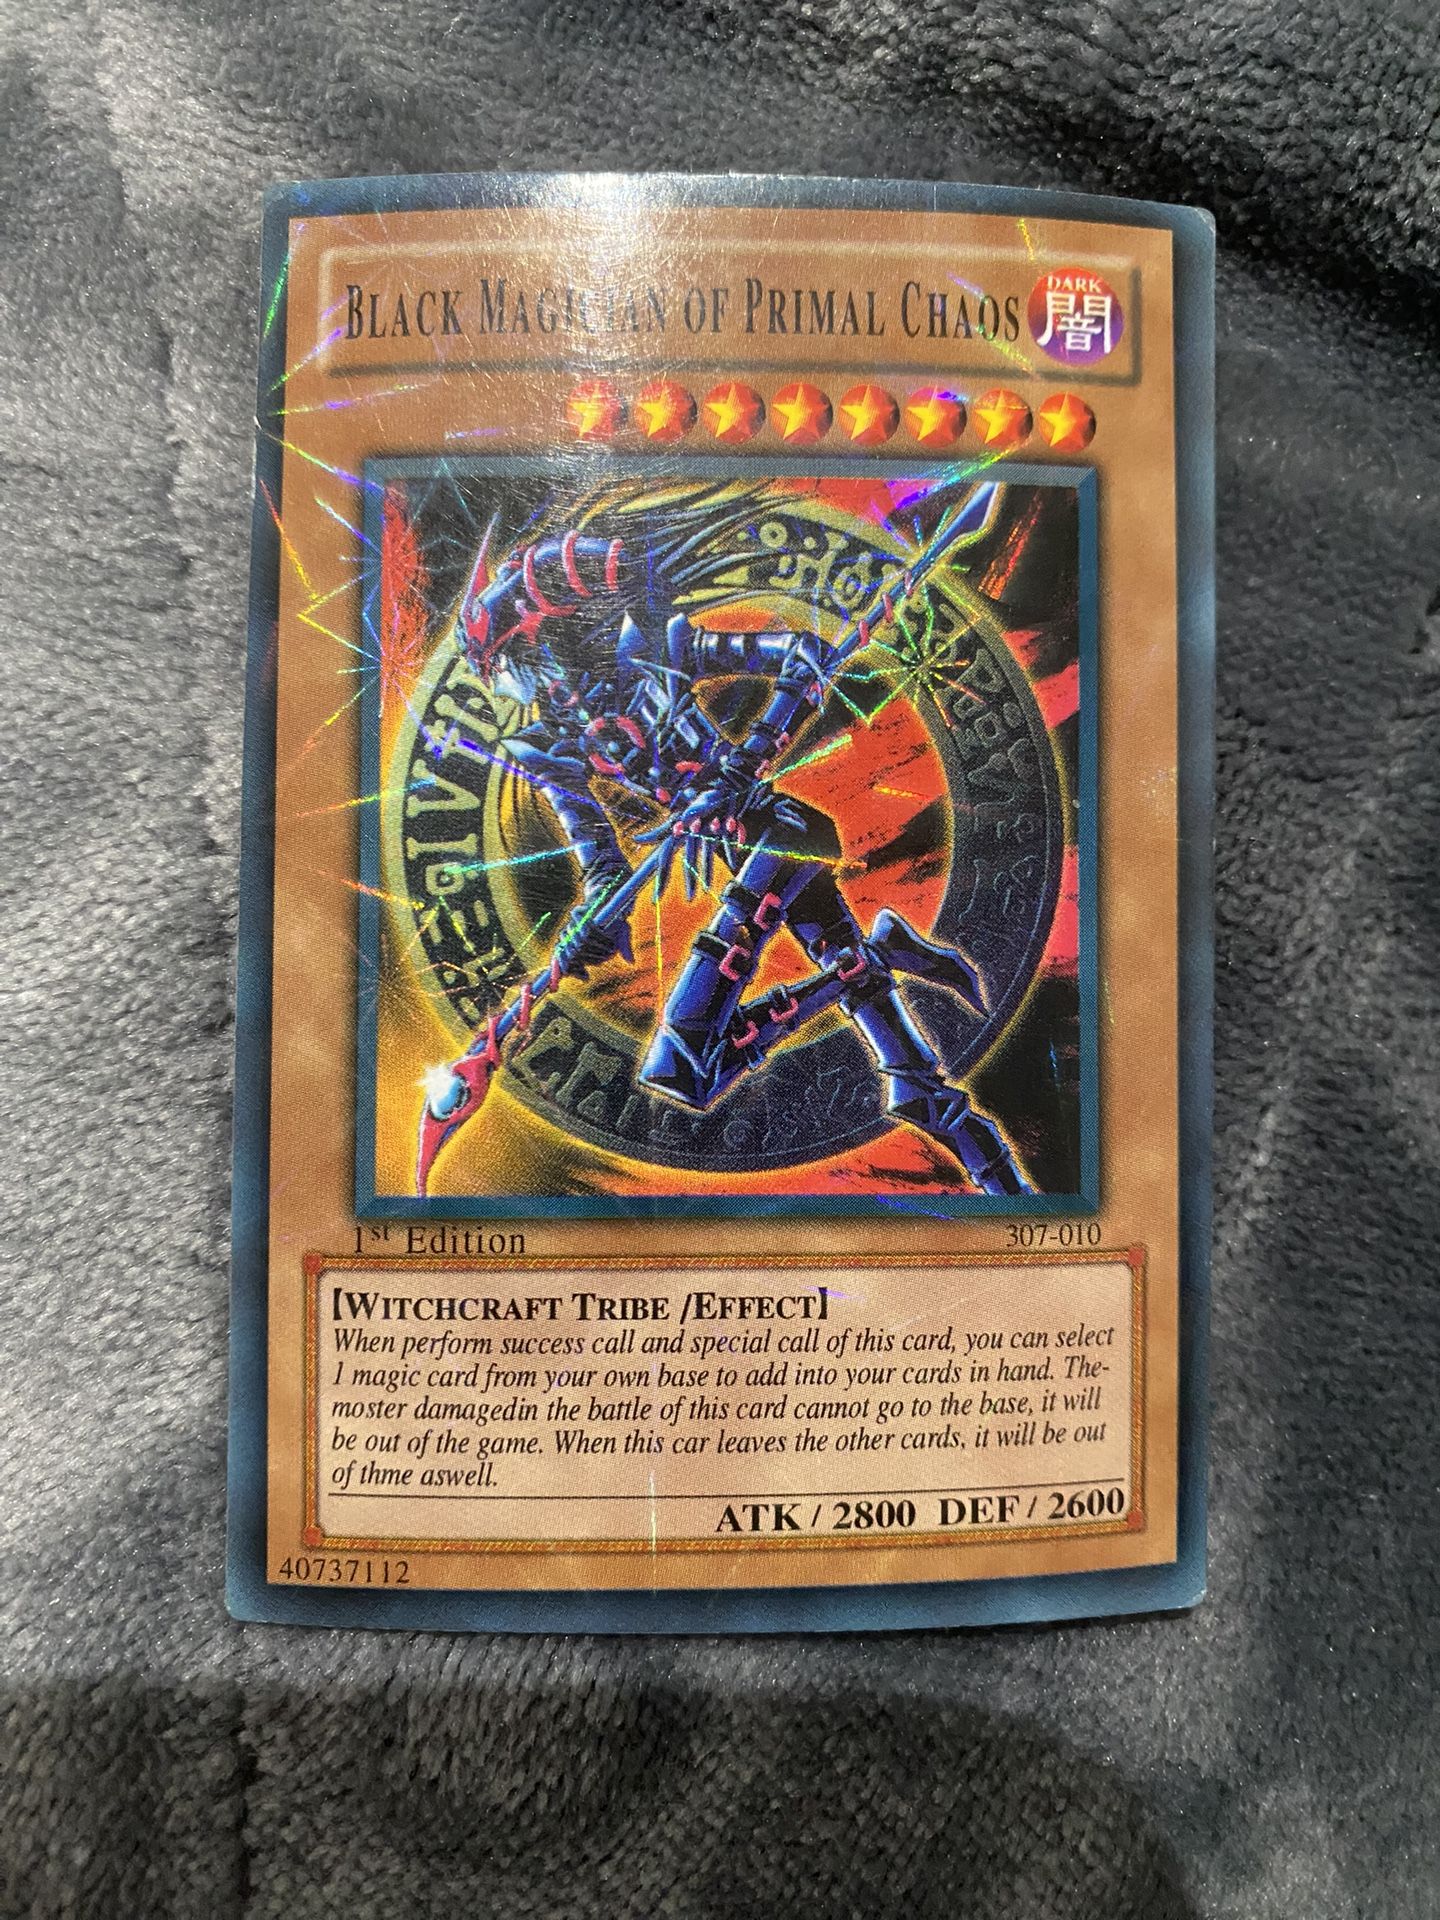 1st edition Black Magician of Primal Chaos Yu-Gi-Oh card 